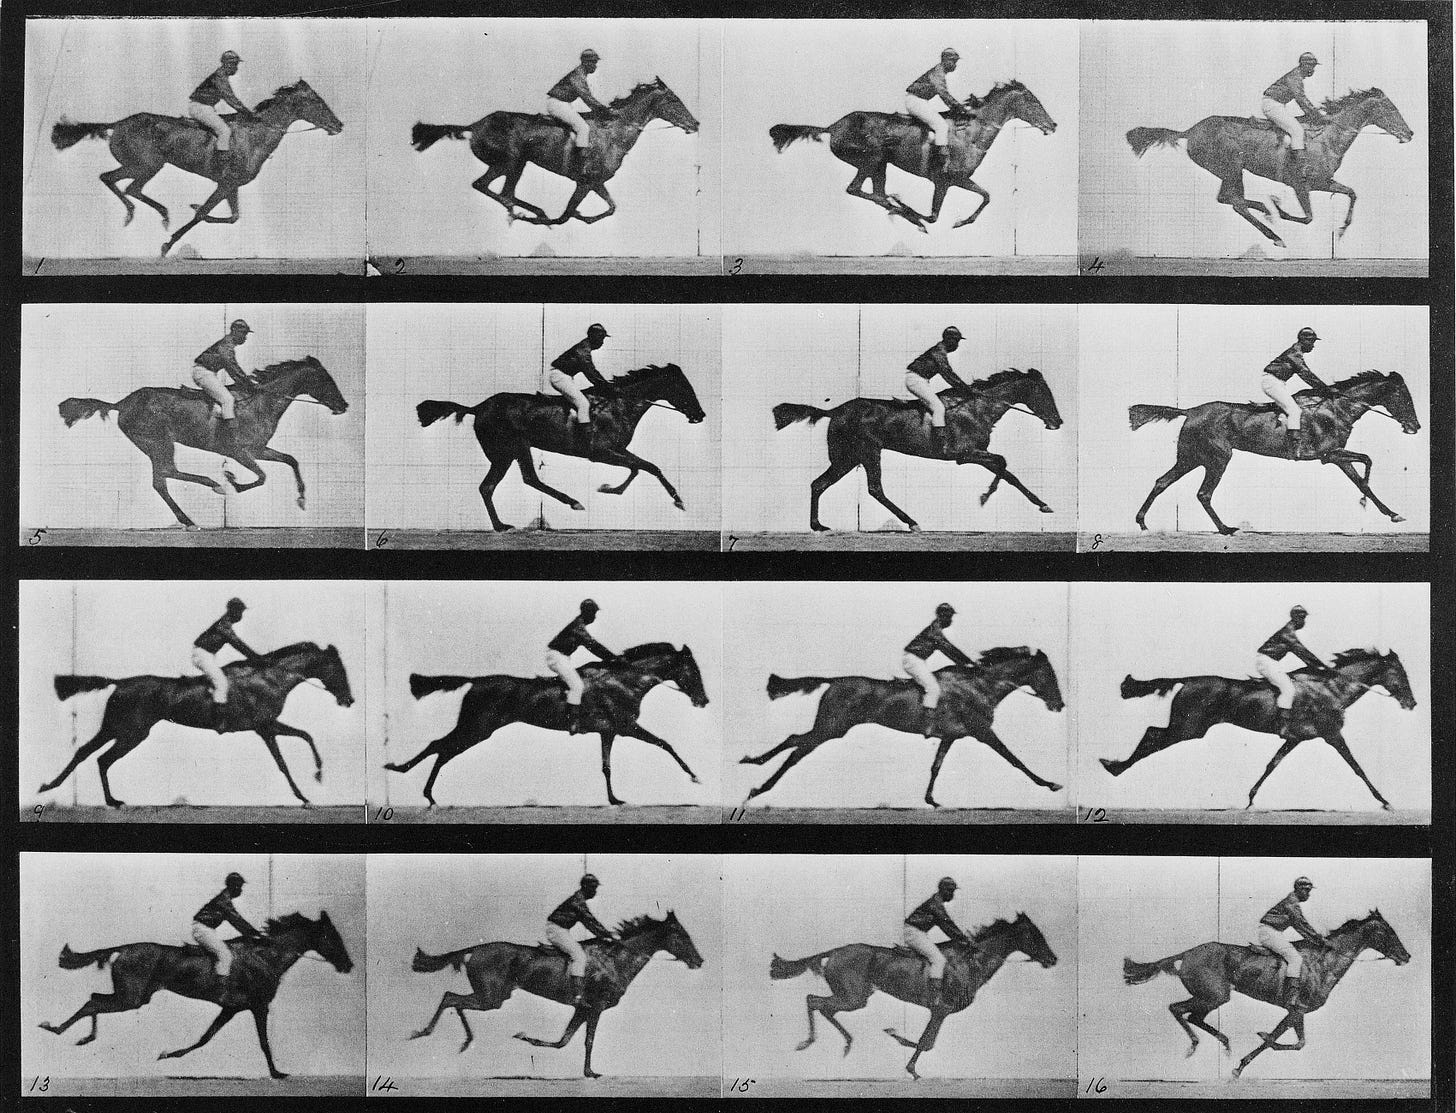 Animal locomotion - 16 frames of racehorse "Annie G." galloping